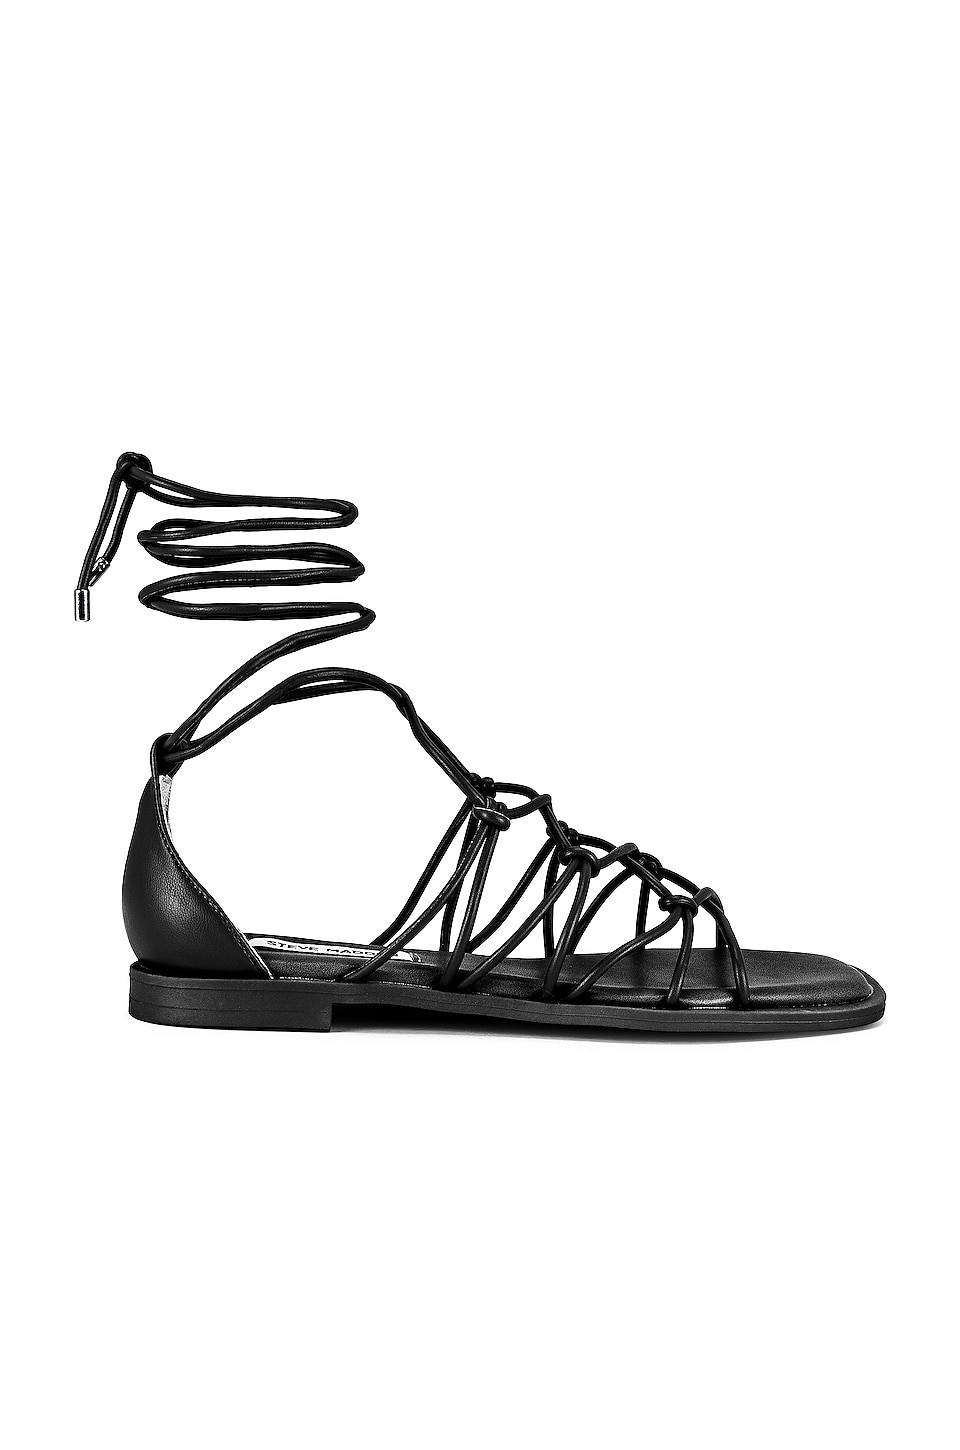 Free People Sandals Shoes - REVOLVE